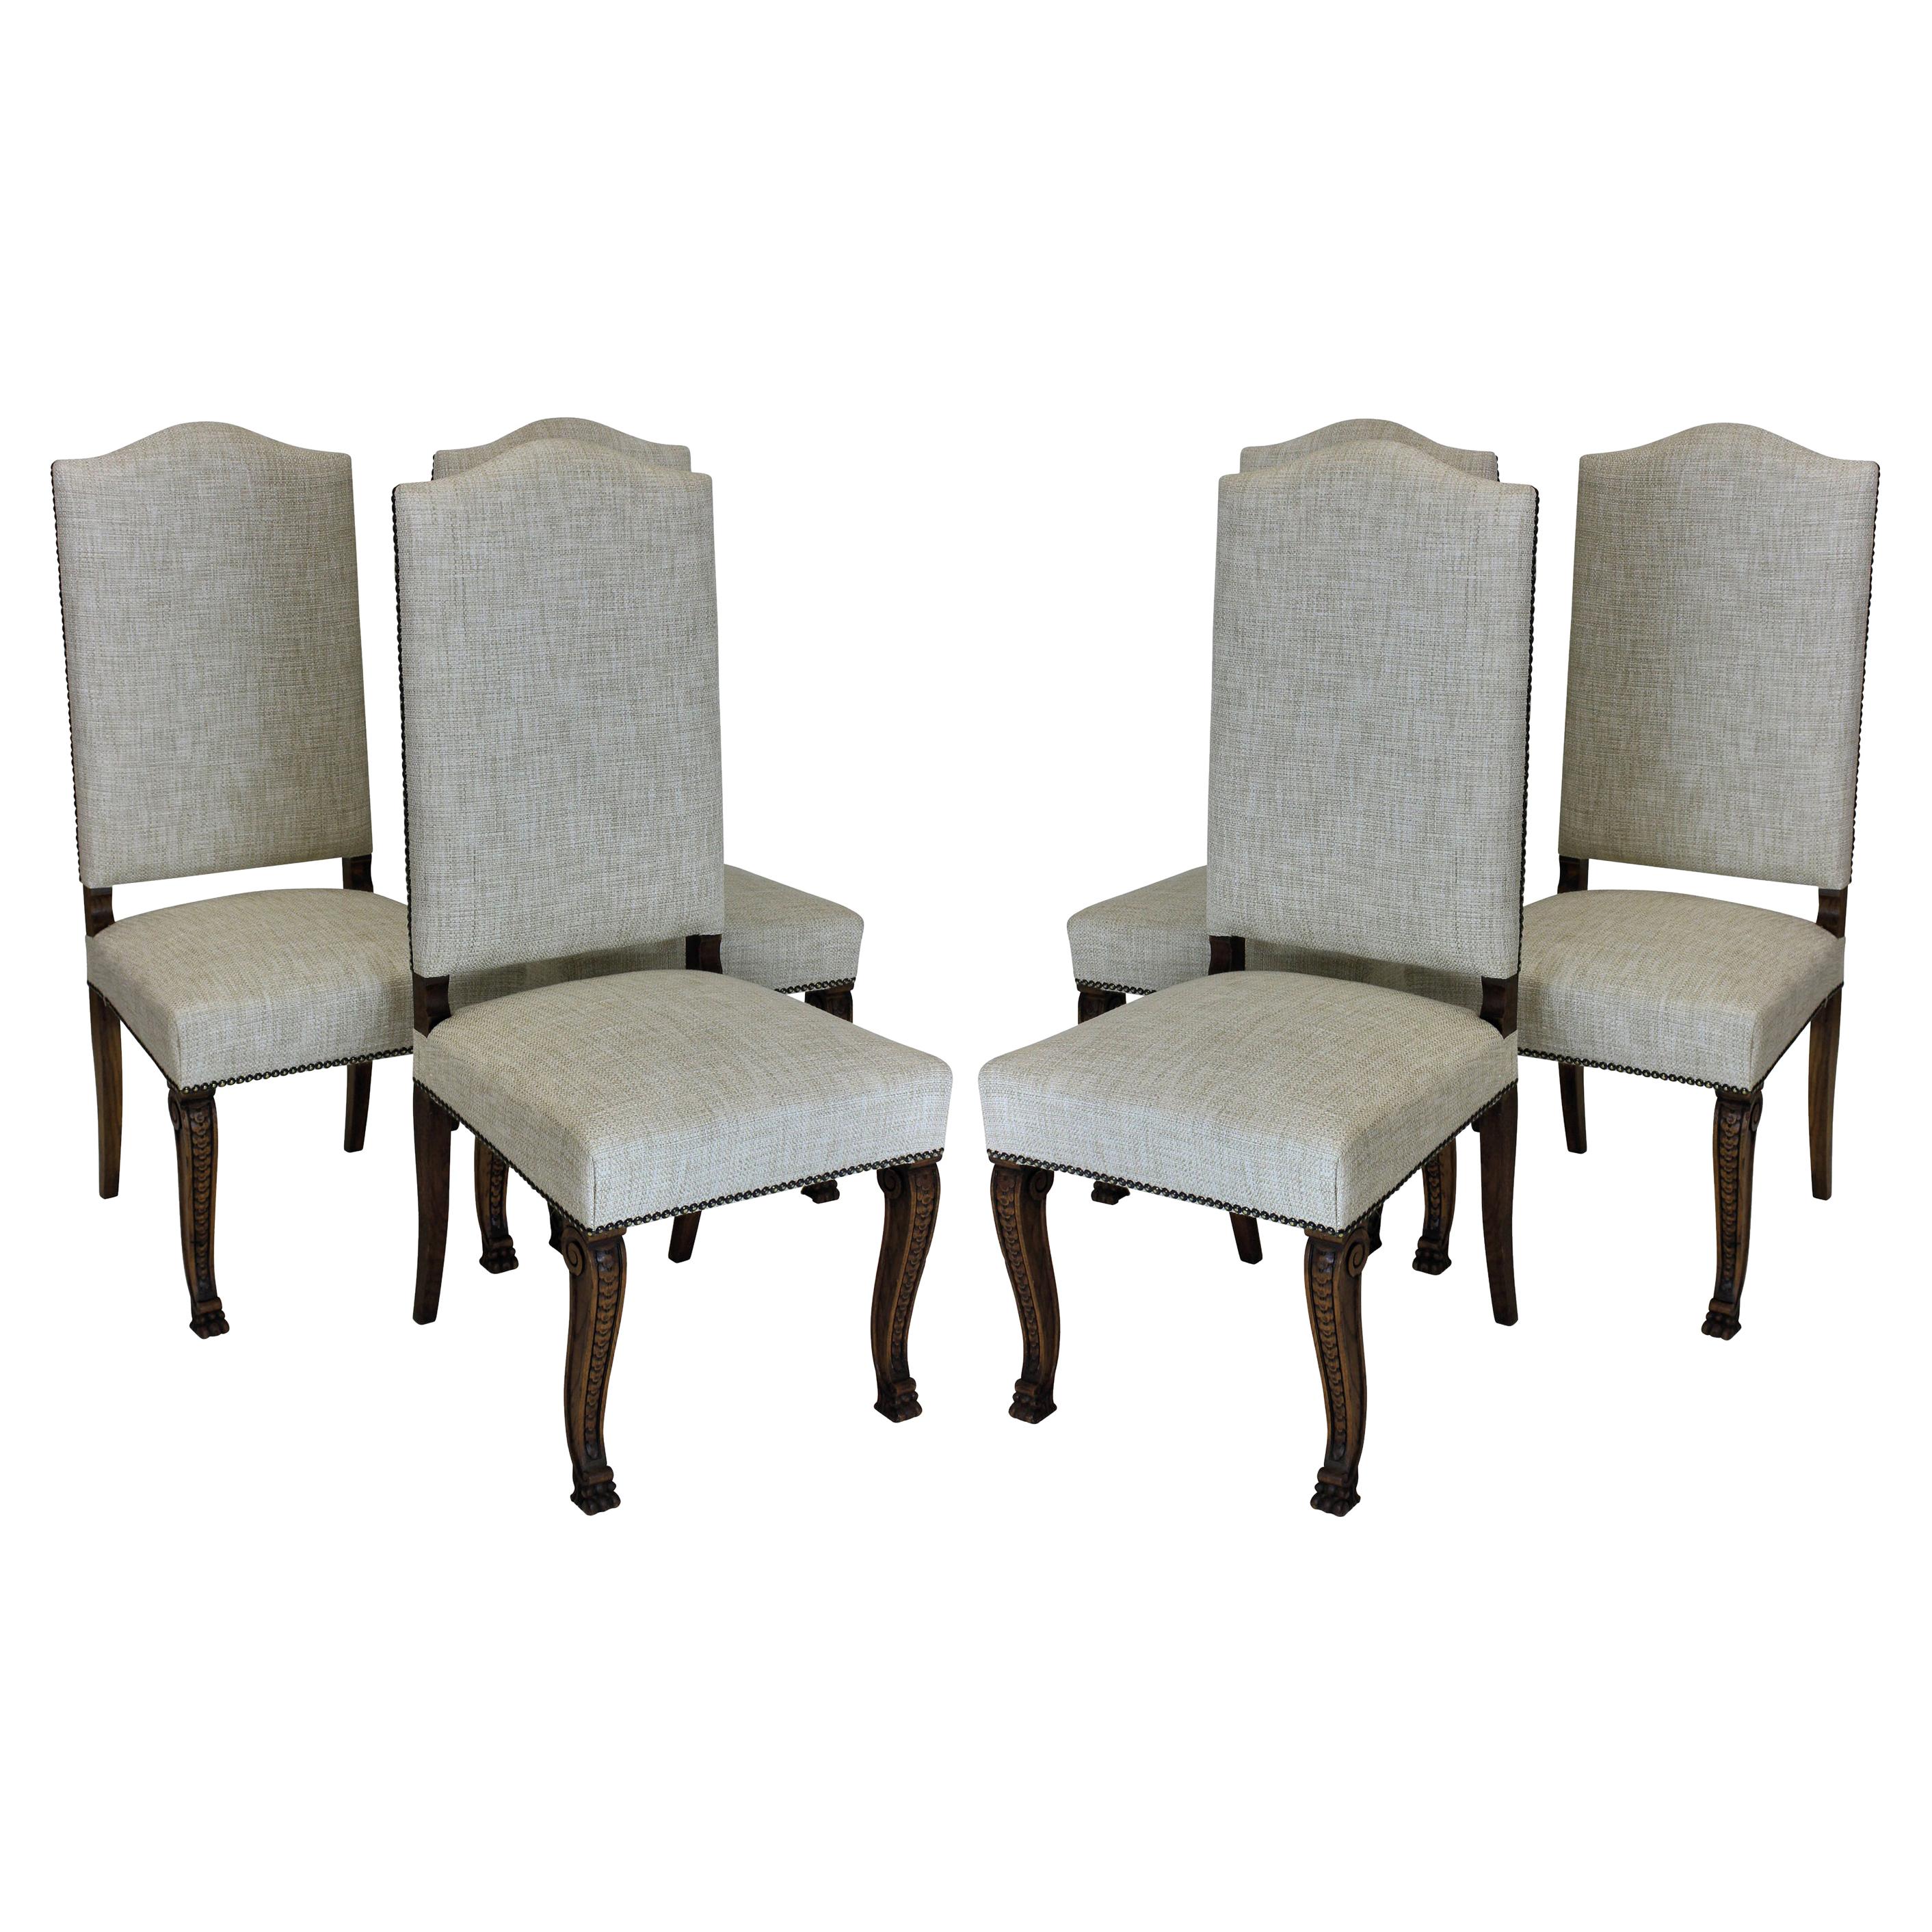 Six French High Back Dining Chairs